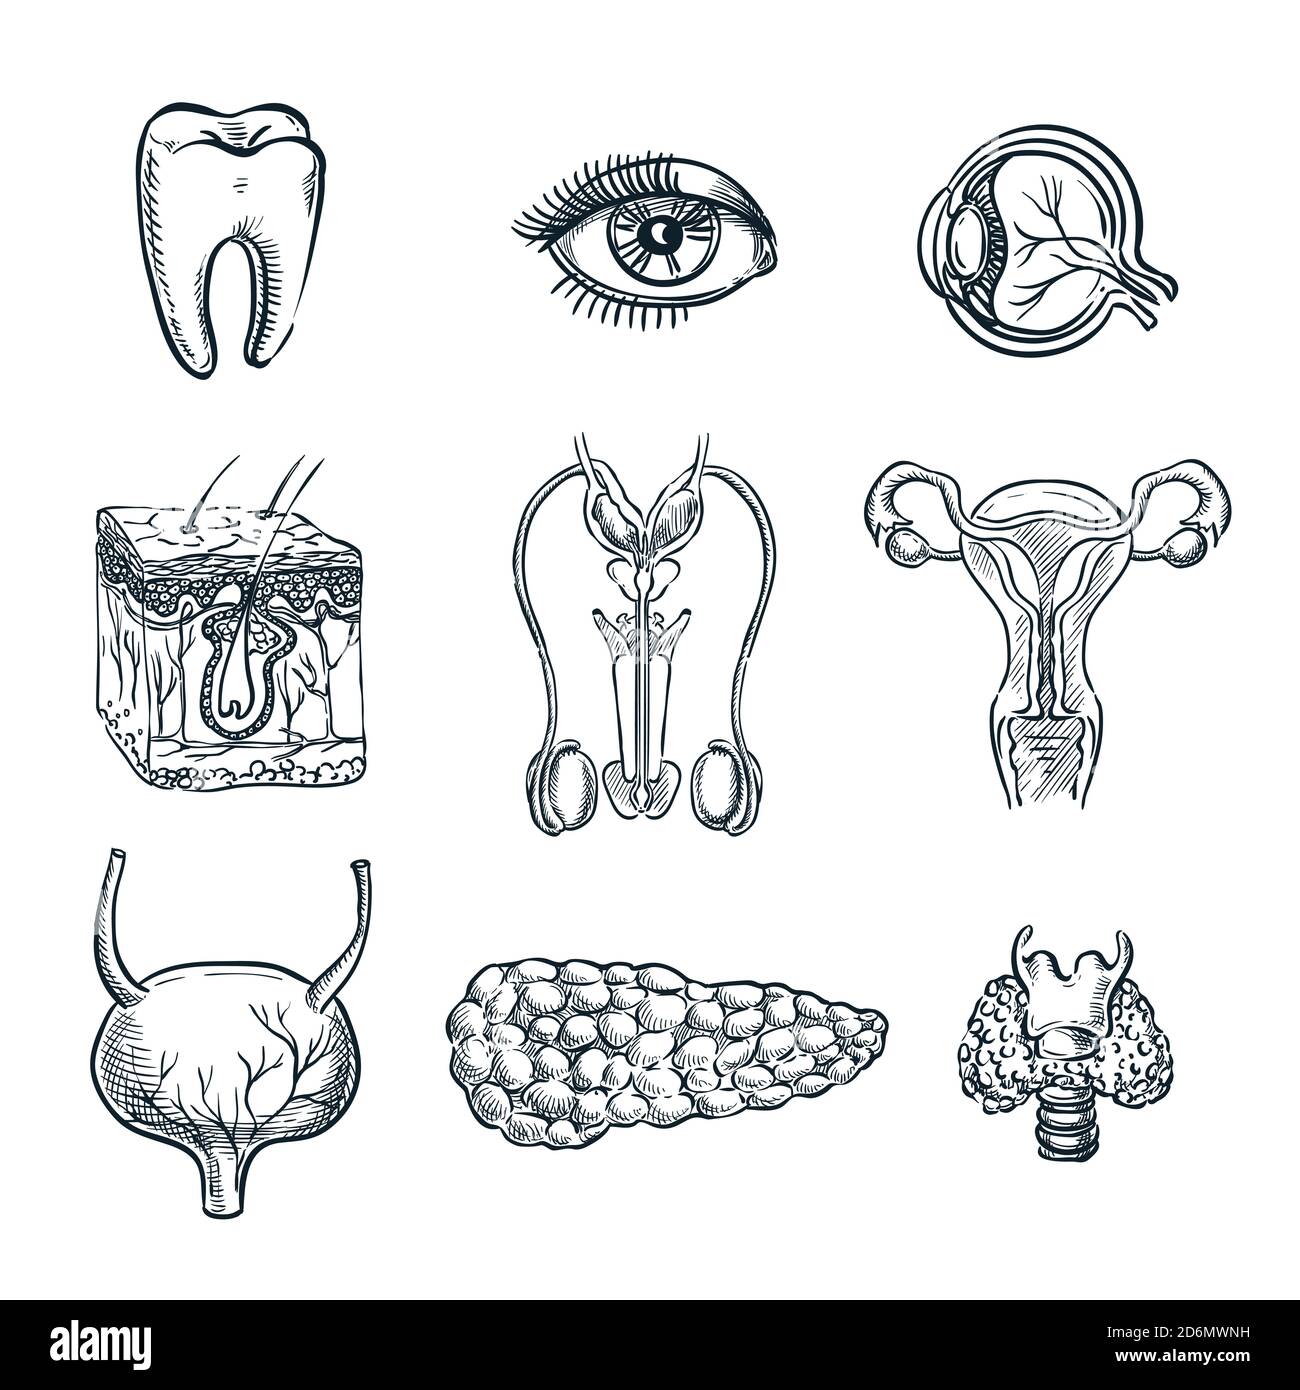 Human internal organs, tooth and eye. Vector sketch isolated illustration. Hand drawn doodle anatomy symbols set. Stock Vector